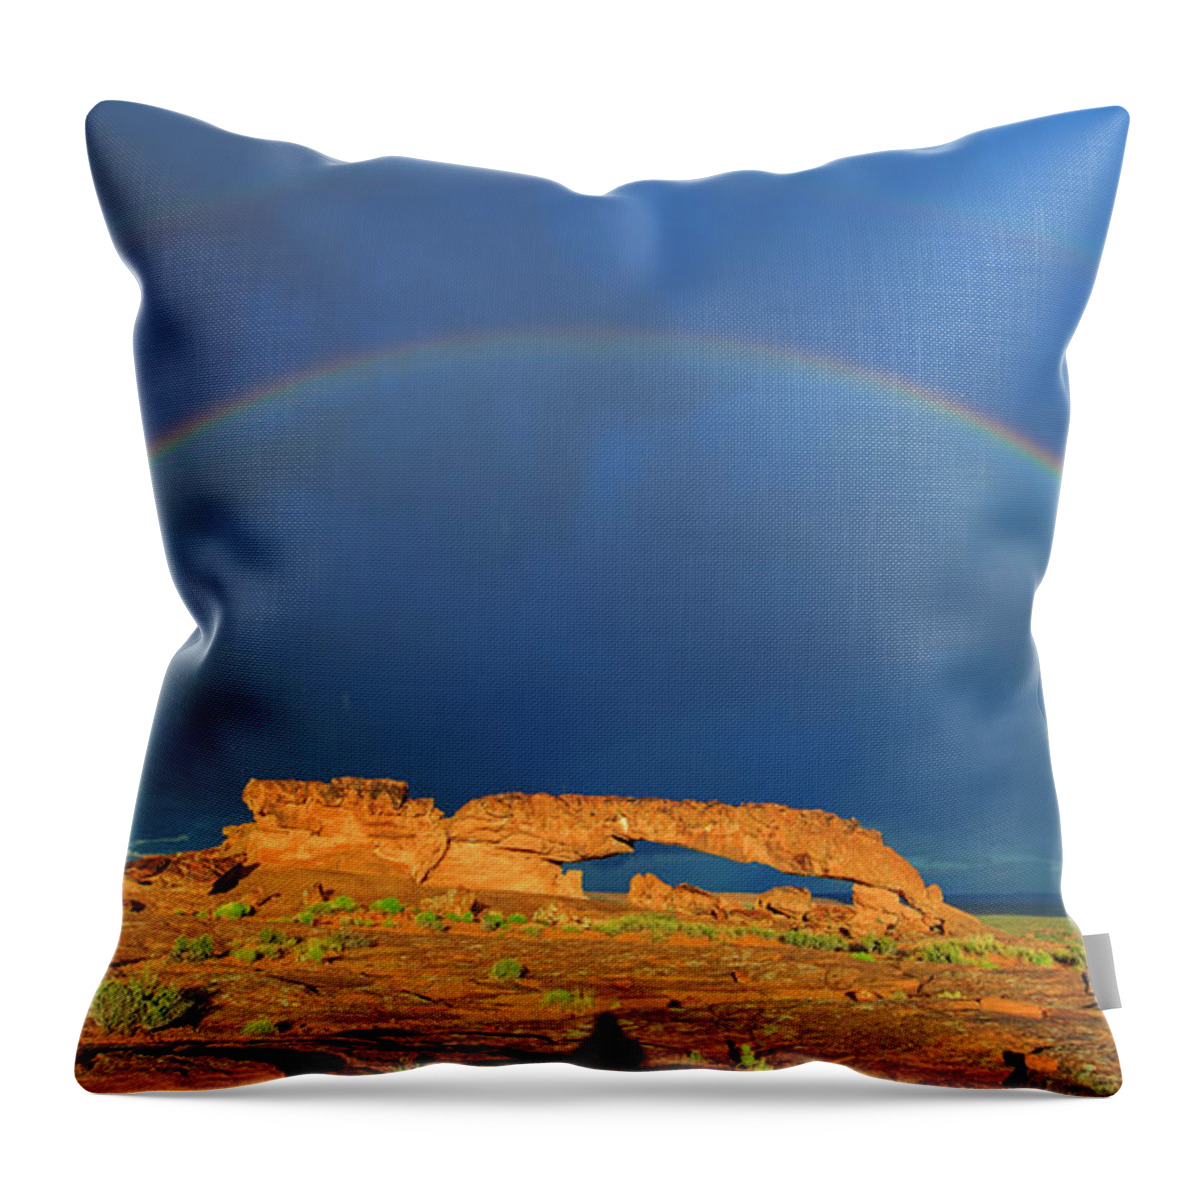 Sky Throw Pillow featuring the photograph Arching Over by Ralf Rohner